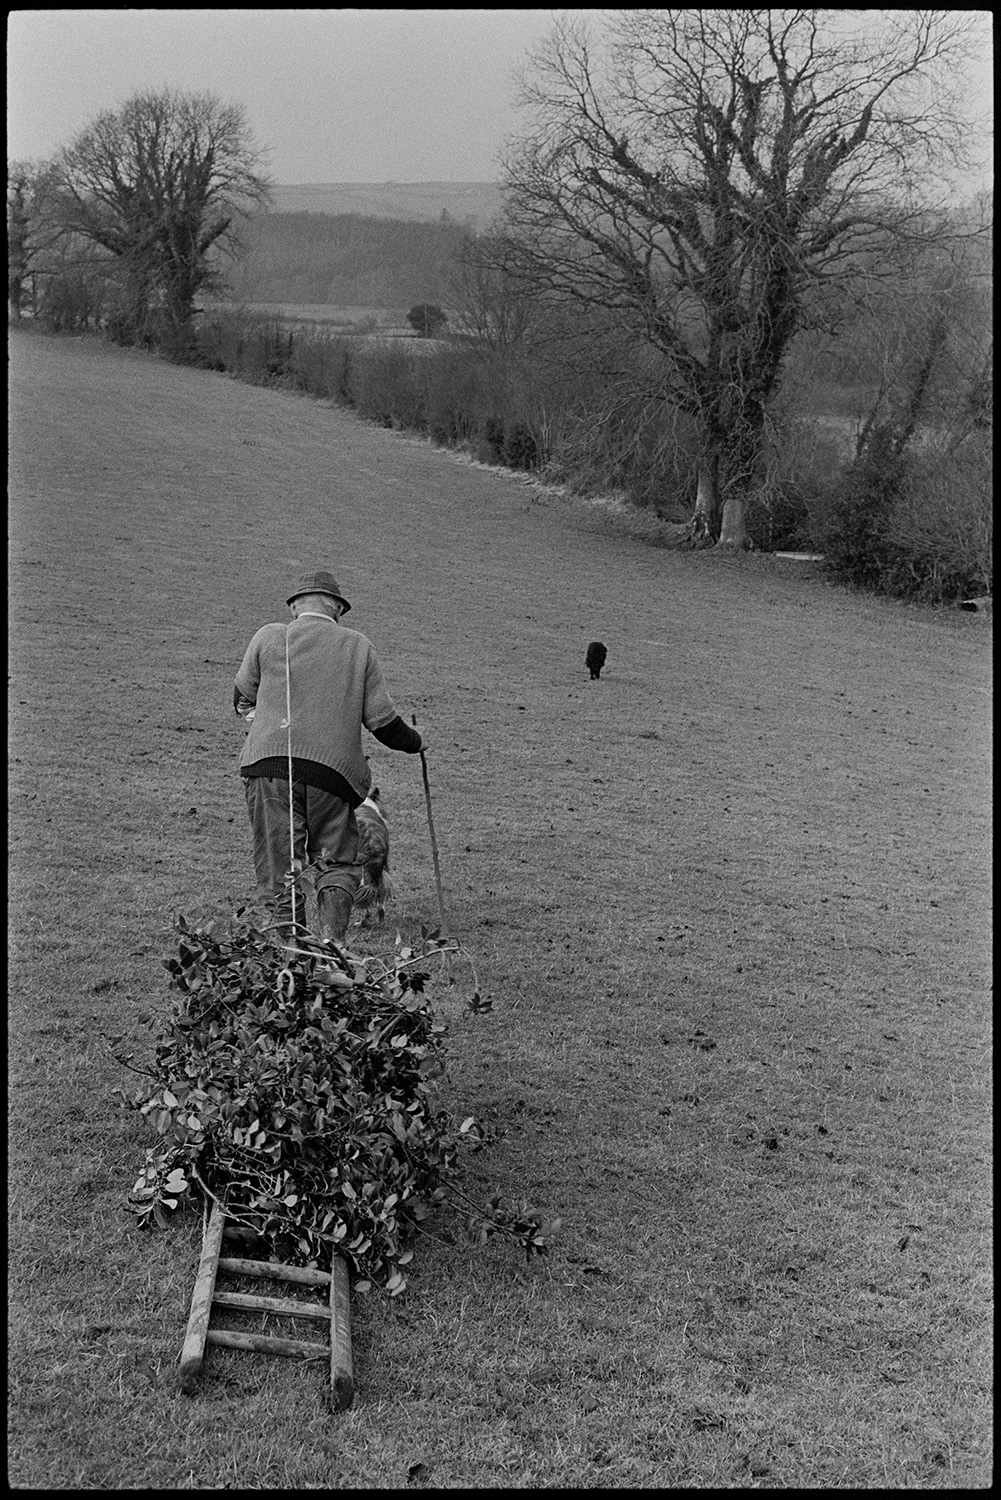 Men bundling up holly for Christmas decorations and dragging it home, dogs. 
[Archie Parkhouse dragging a ladder with a bundle of holly tied to it across a field at Langham, Dolton. He is accompanied by his two dogs.]